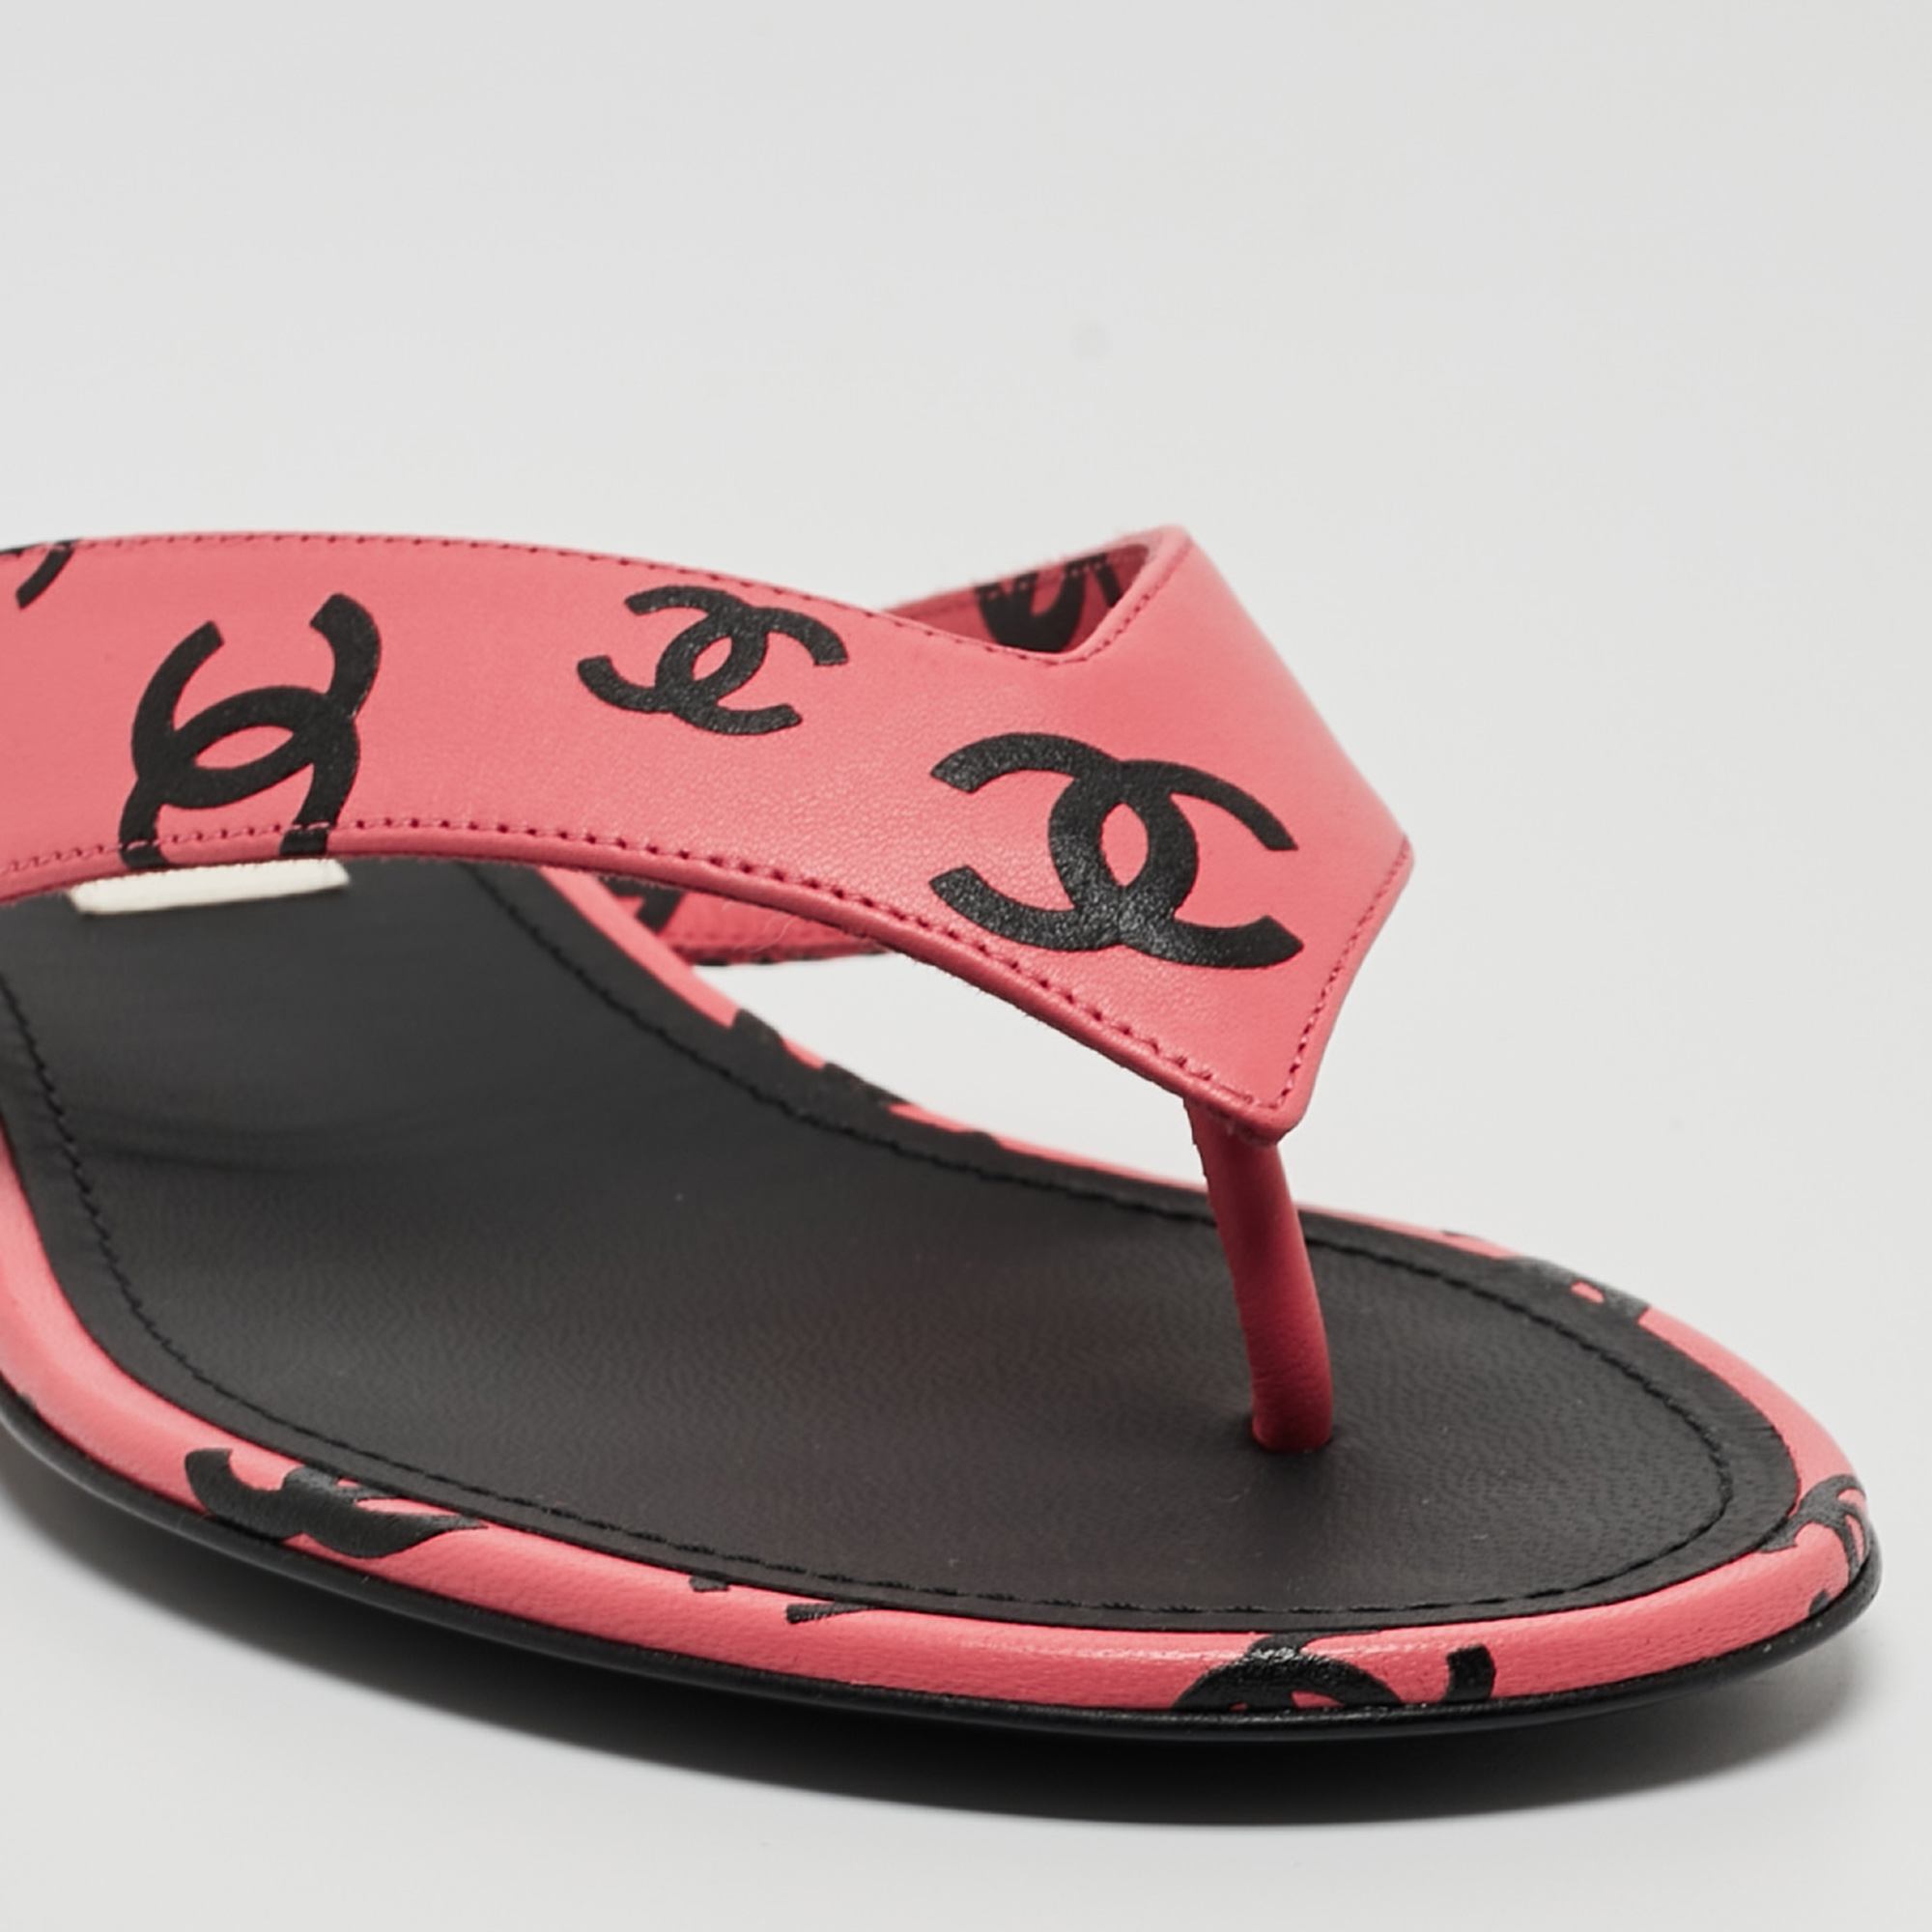 Chanel Pink/Black CC Print Leather Thong Sandals Size 36